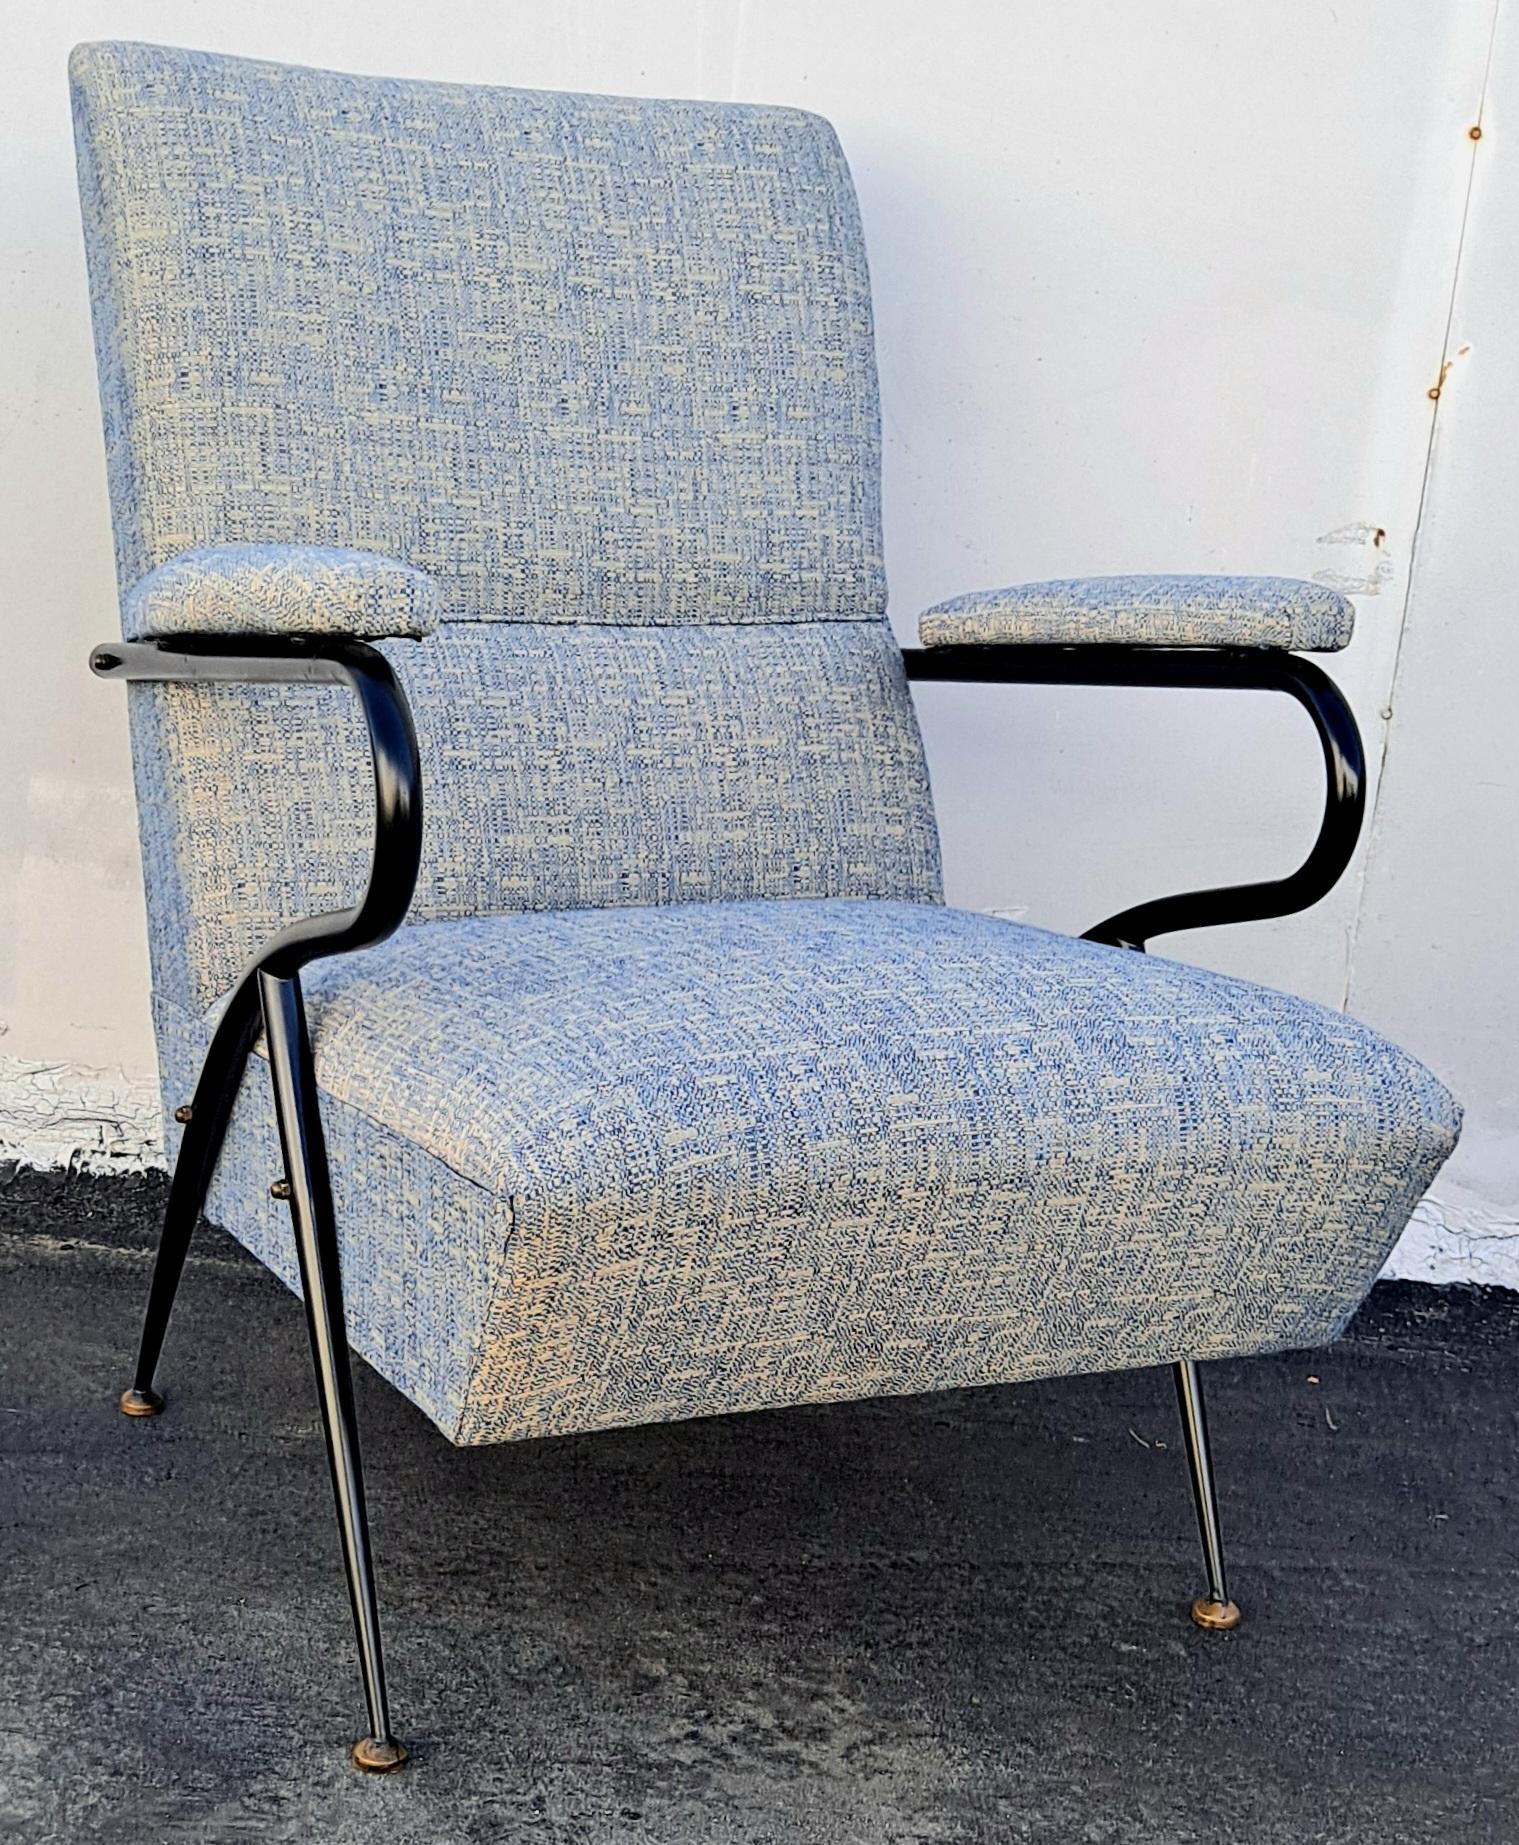 Italian metal frame armchair has a modern and slick design as well as the durability. The metal tubular steel as a base with the bras bouts. Italian upholstery is combine linen and cotton material.